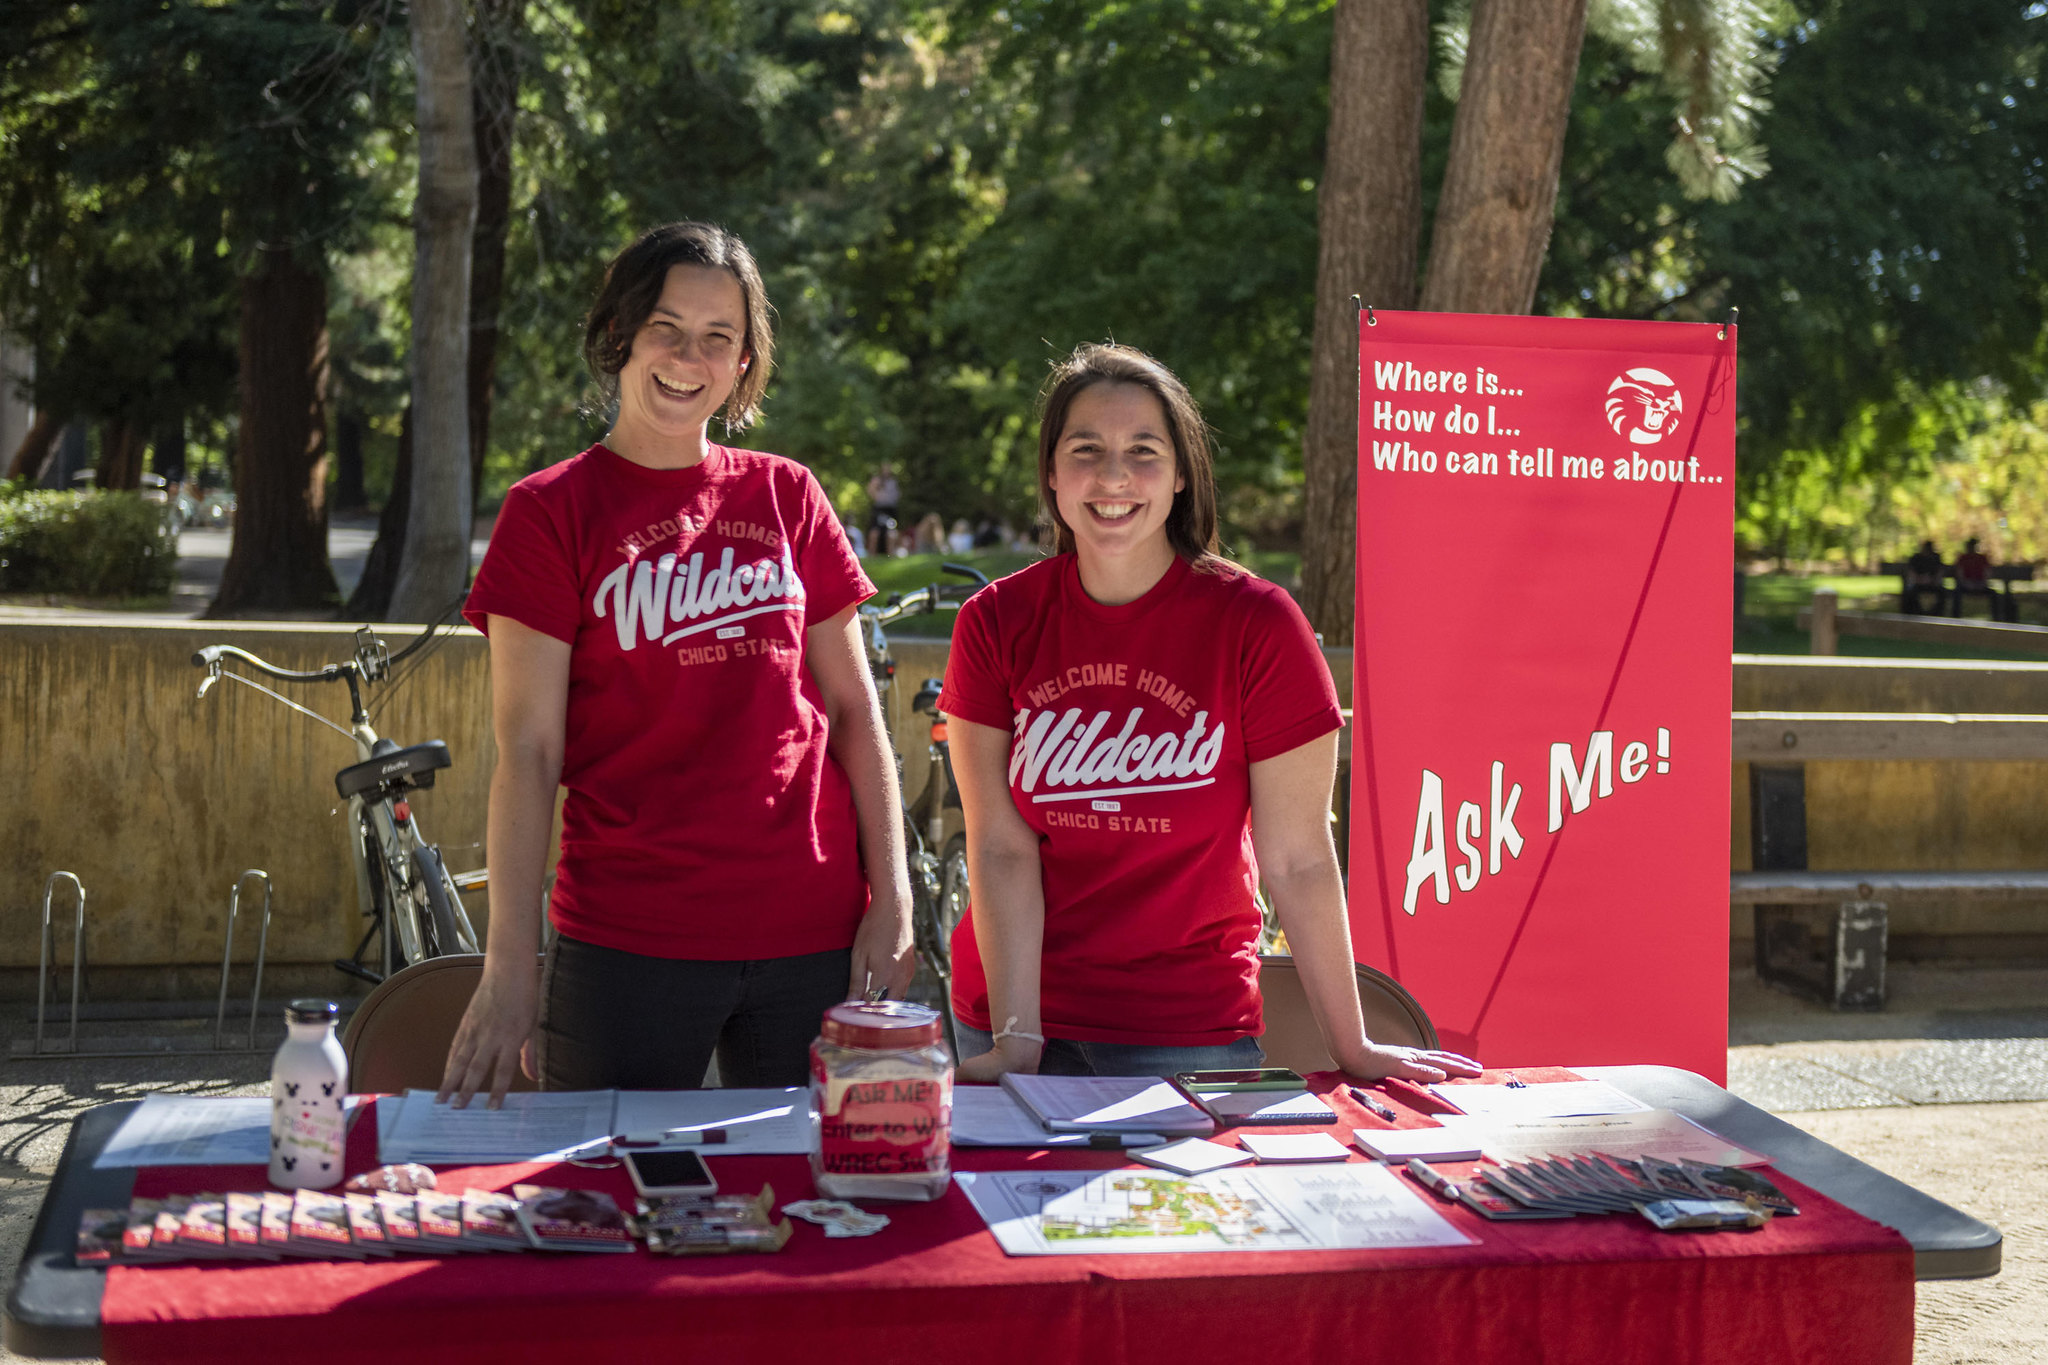 Two people stand at the Ask Me table, smiling